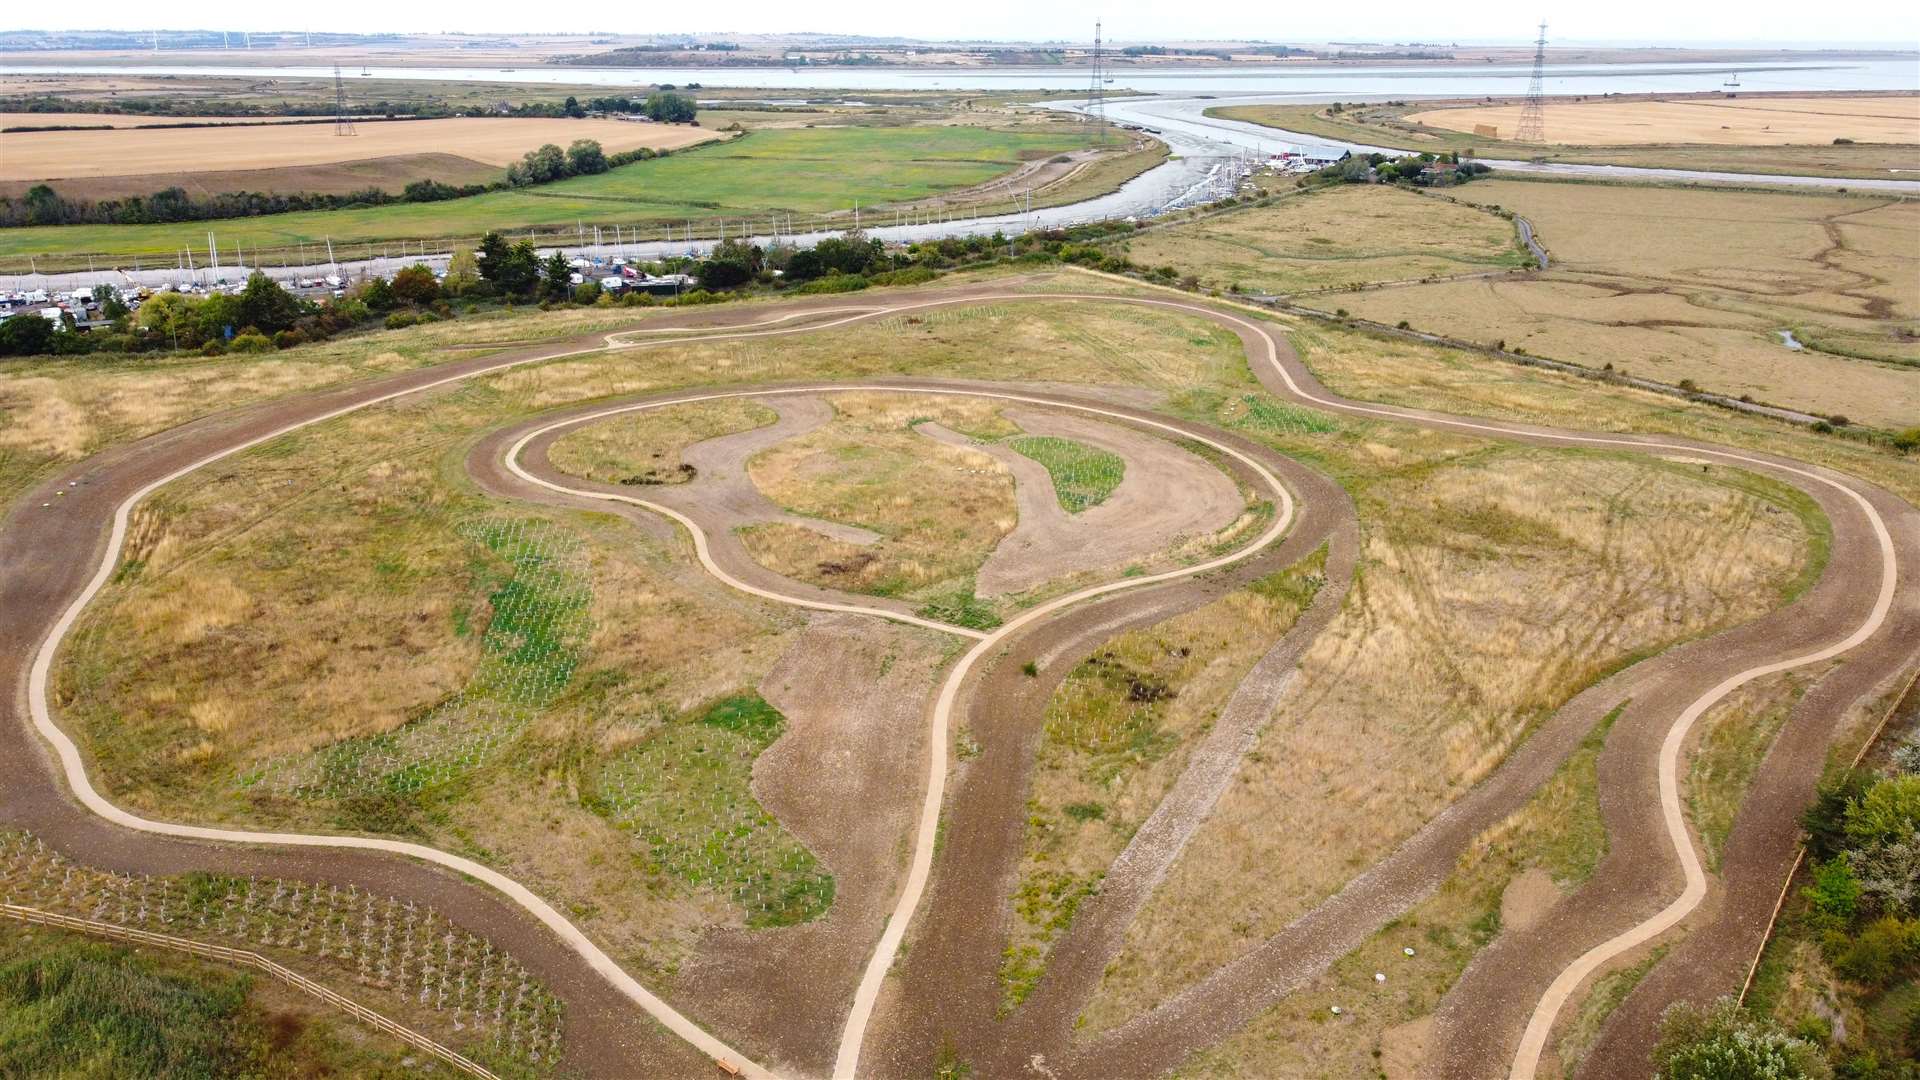 The new country park in Faversham boasts footpaths and circular walks